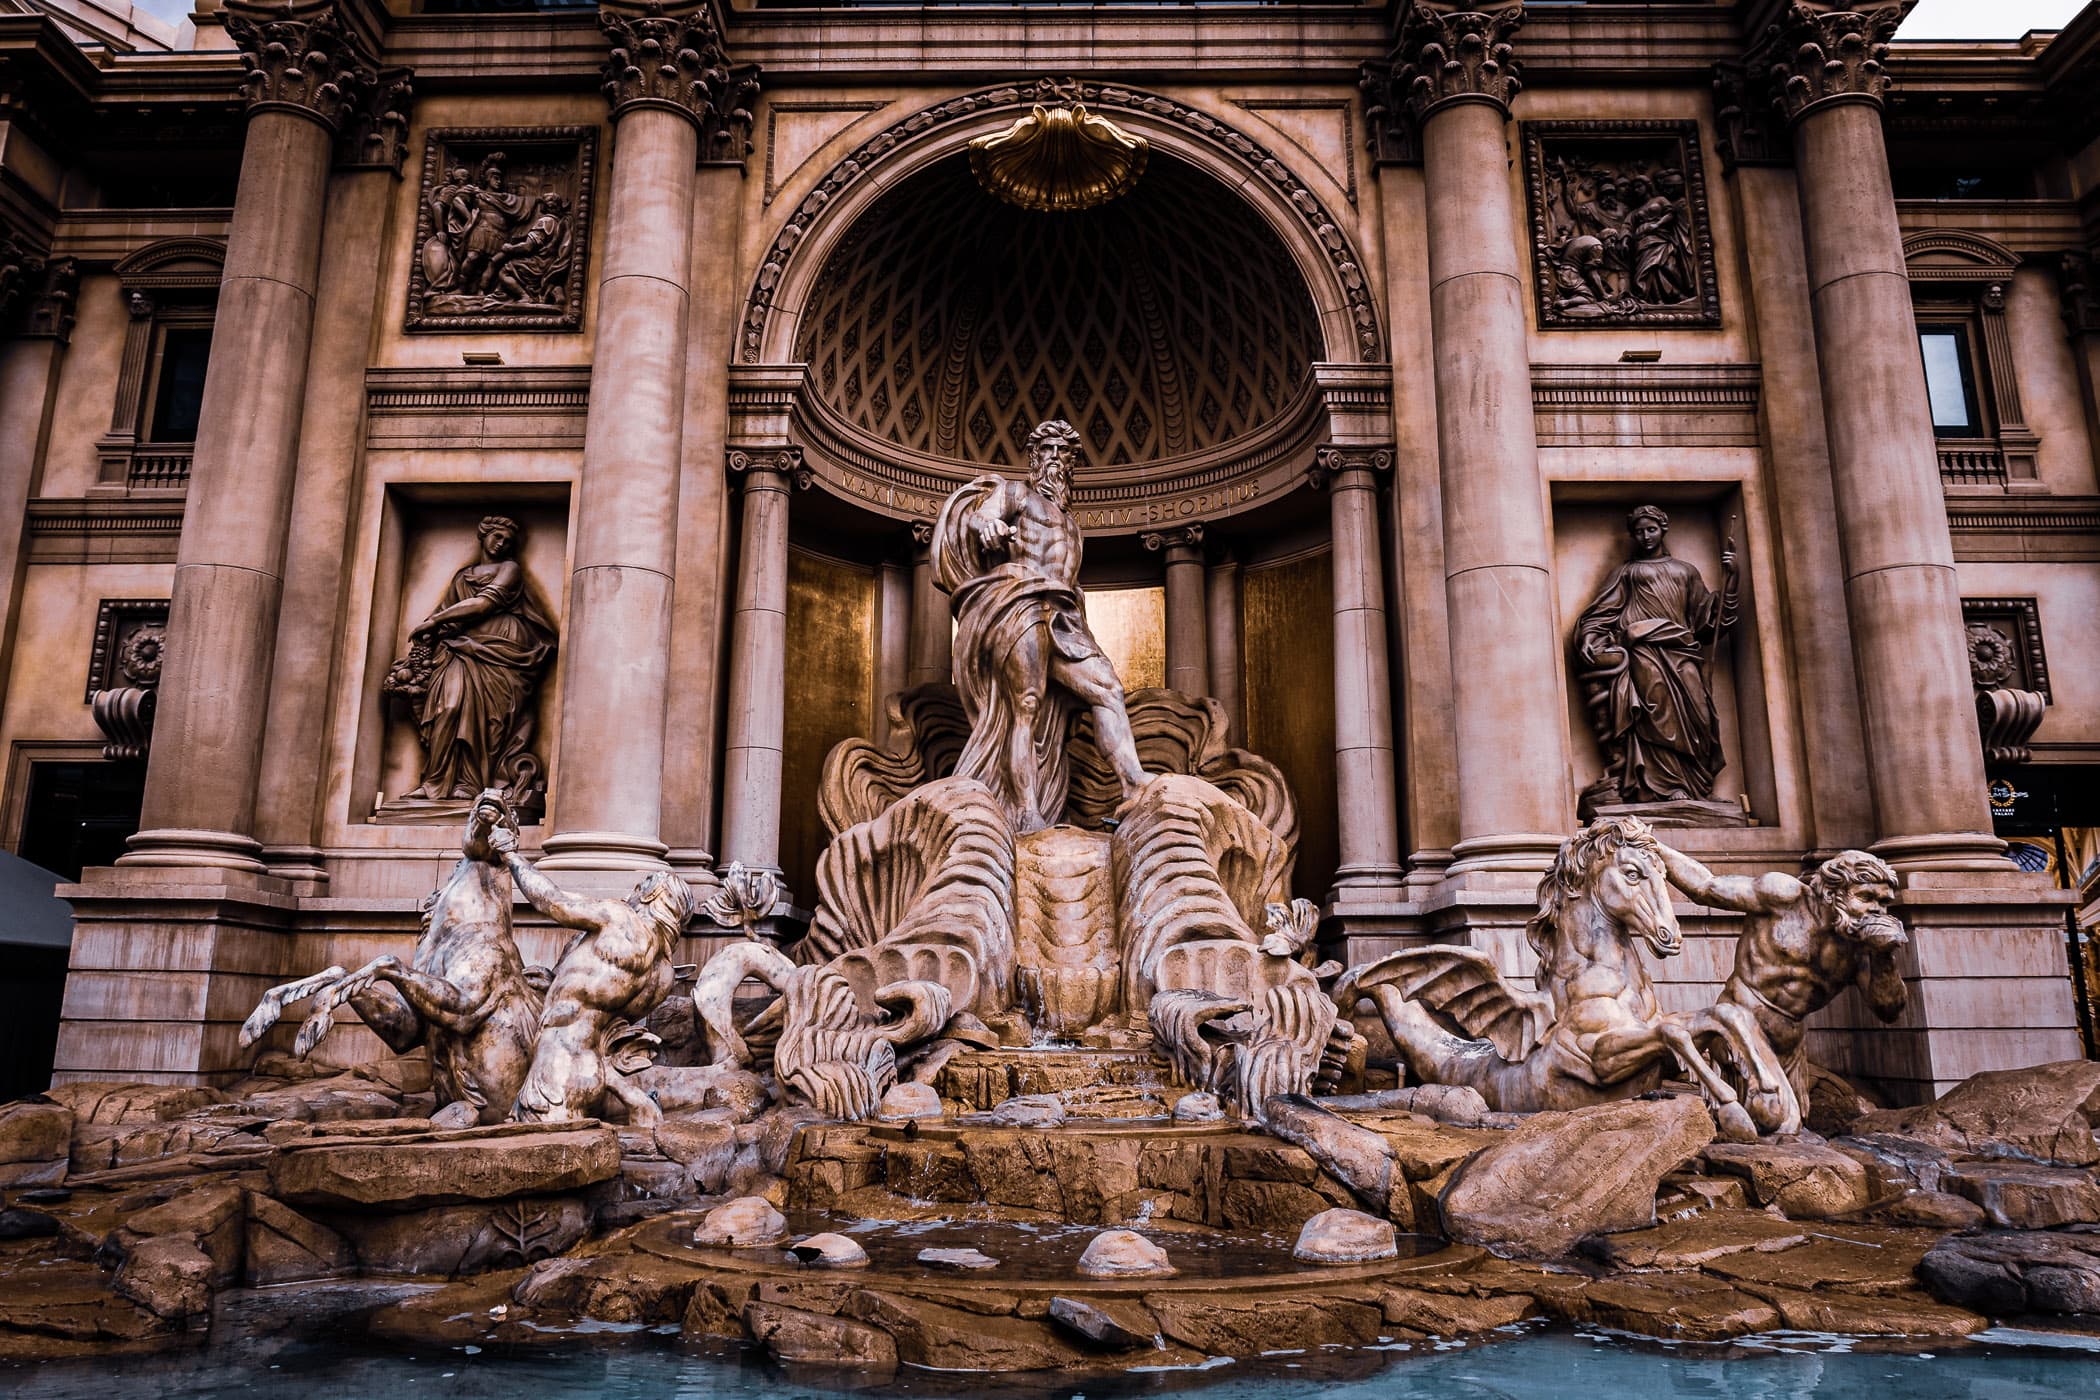 The Roman god of the sea, Neptune, stands in a replica of Rome’s Trevi Fountain at Caesars Palace, Las Vegas.